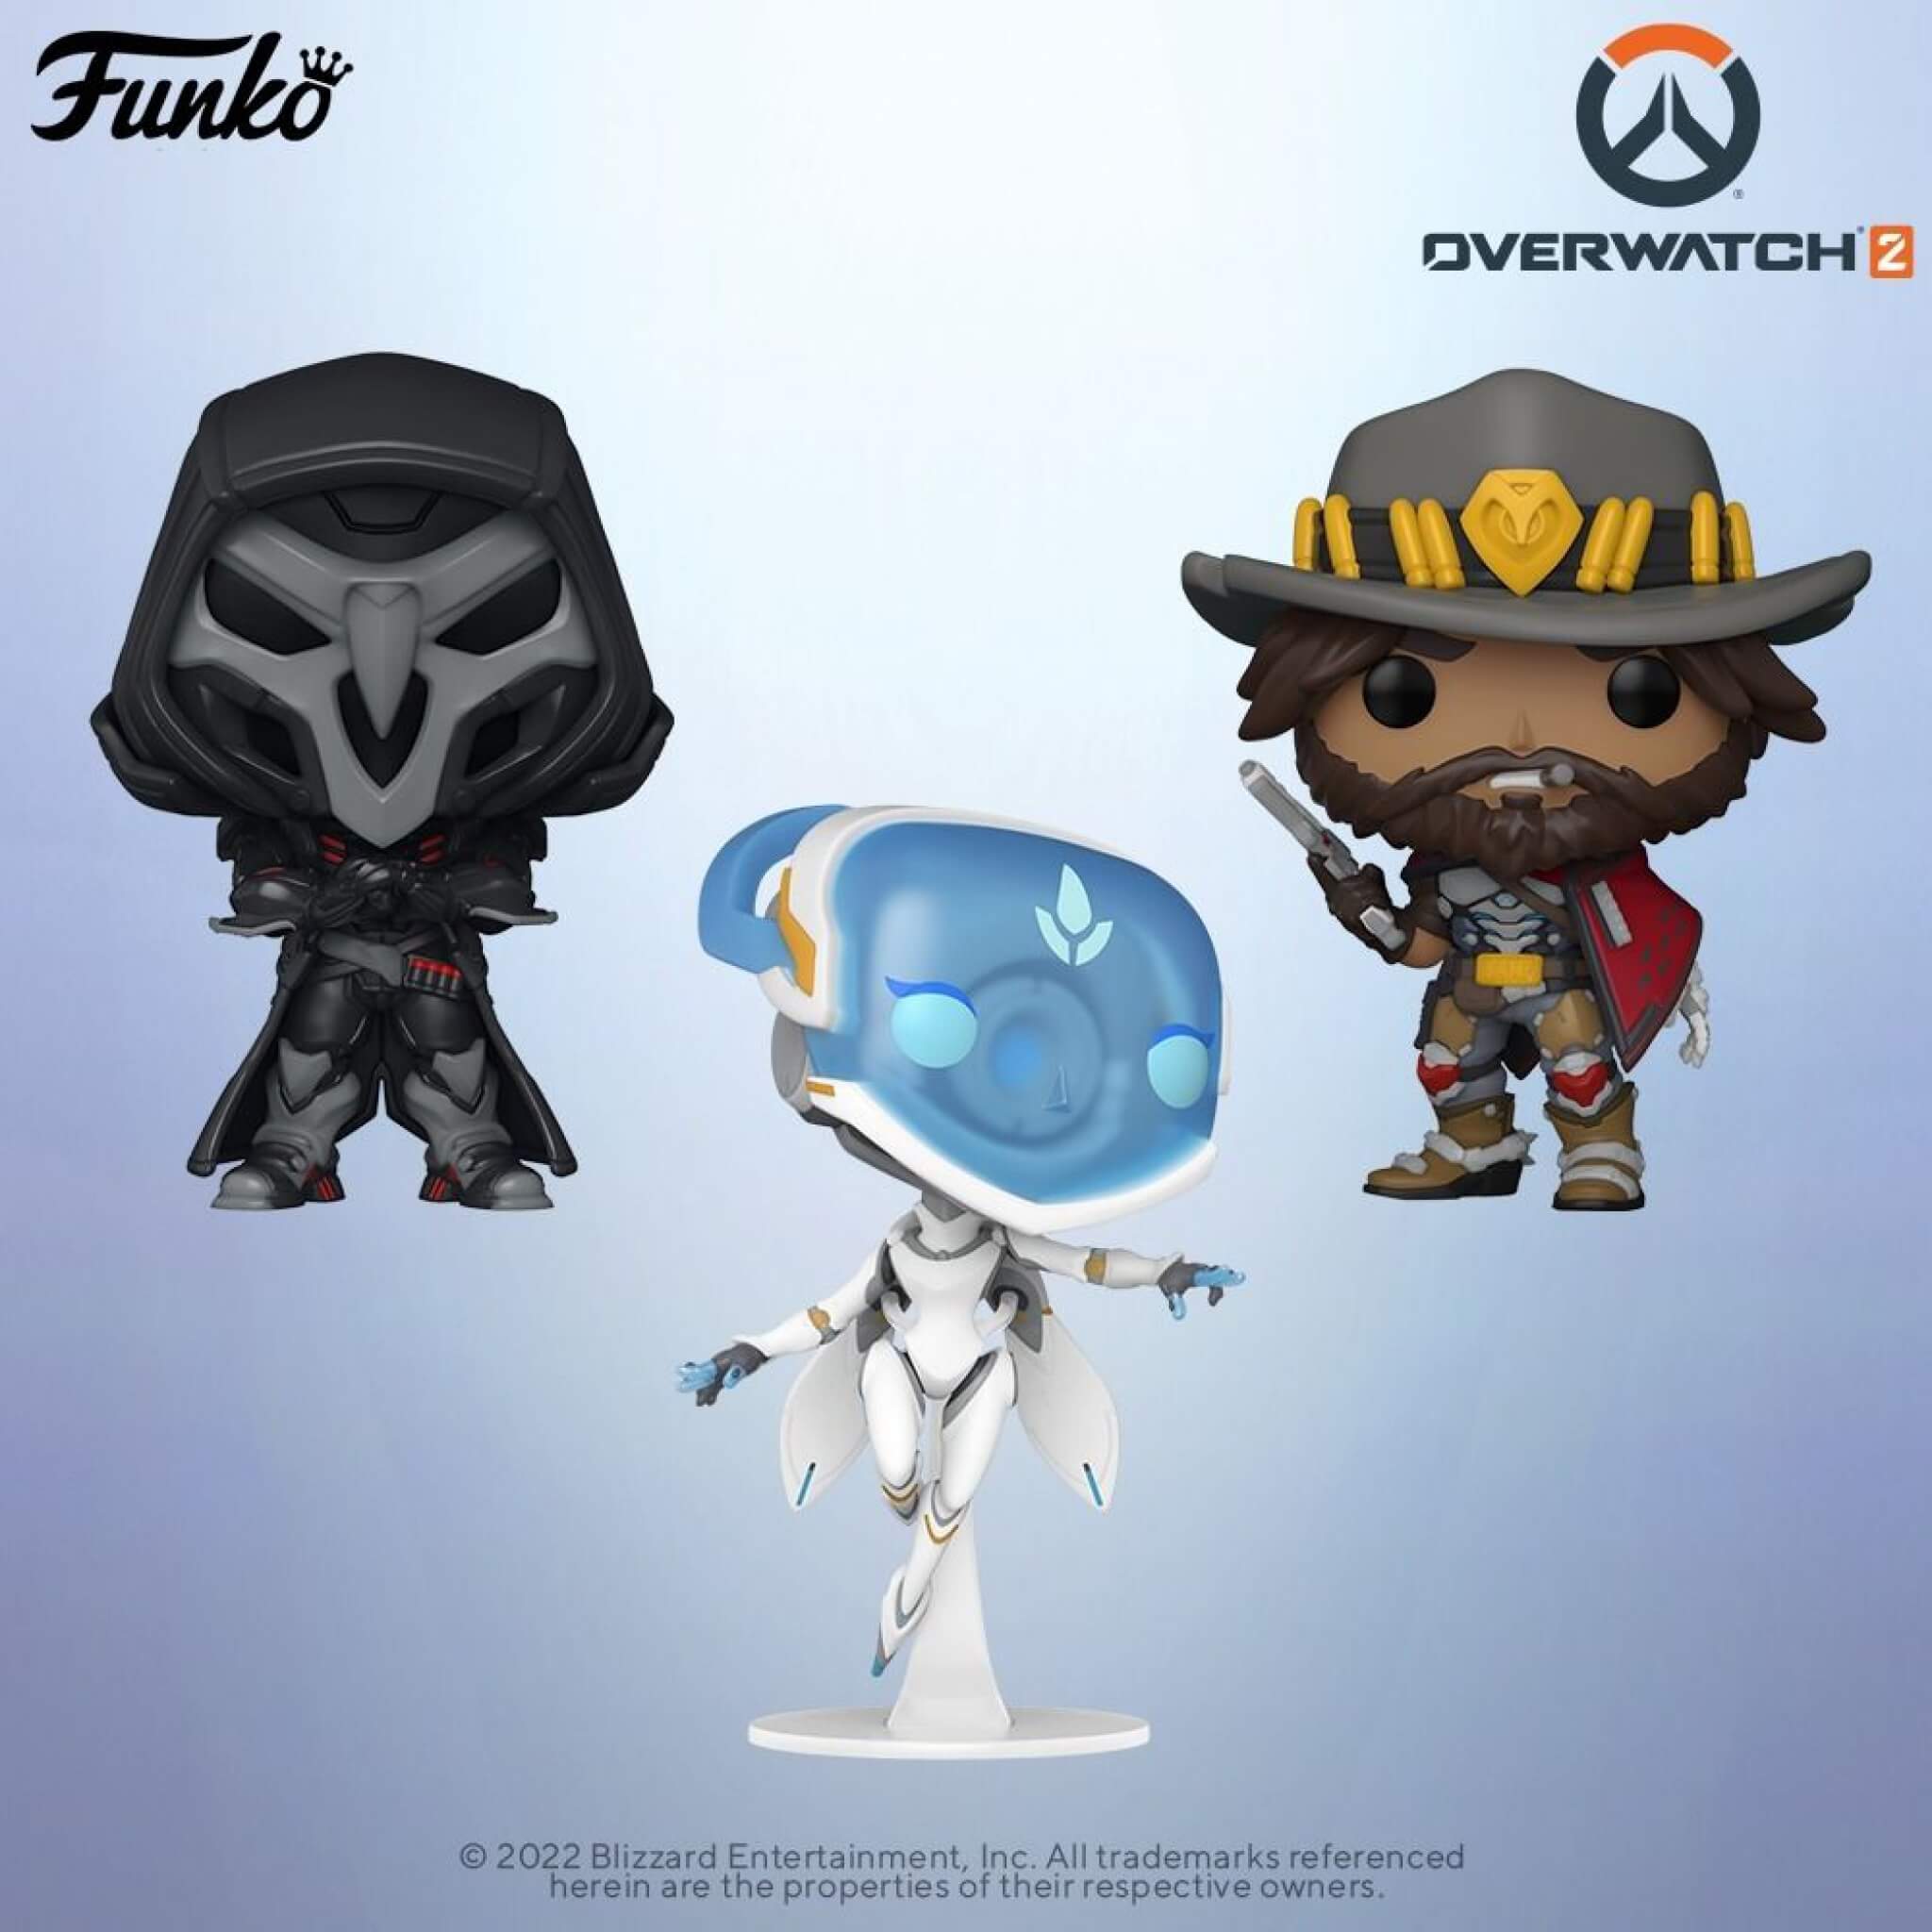 Overwatch 2: the first characters in Funko POP